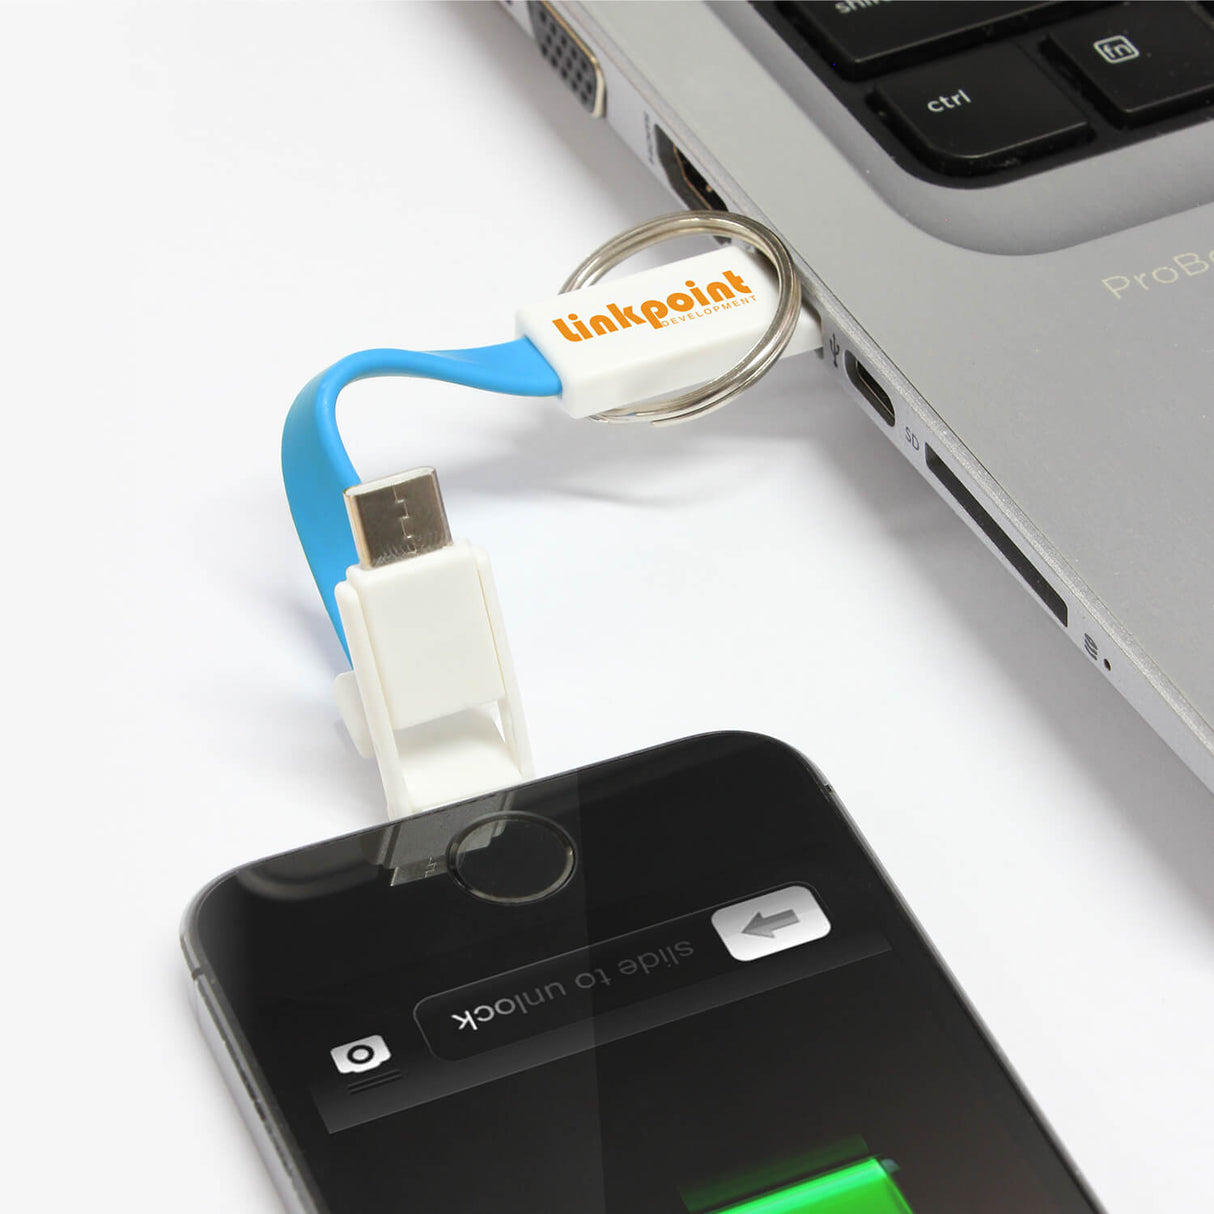 Electron 3-in-1 Charging Cable - Printed